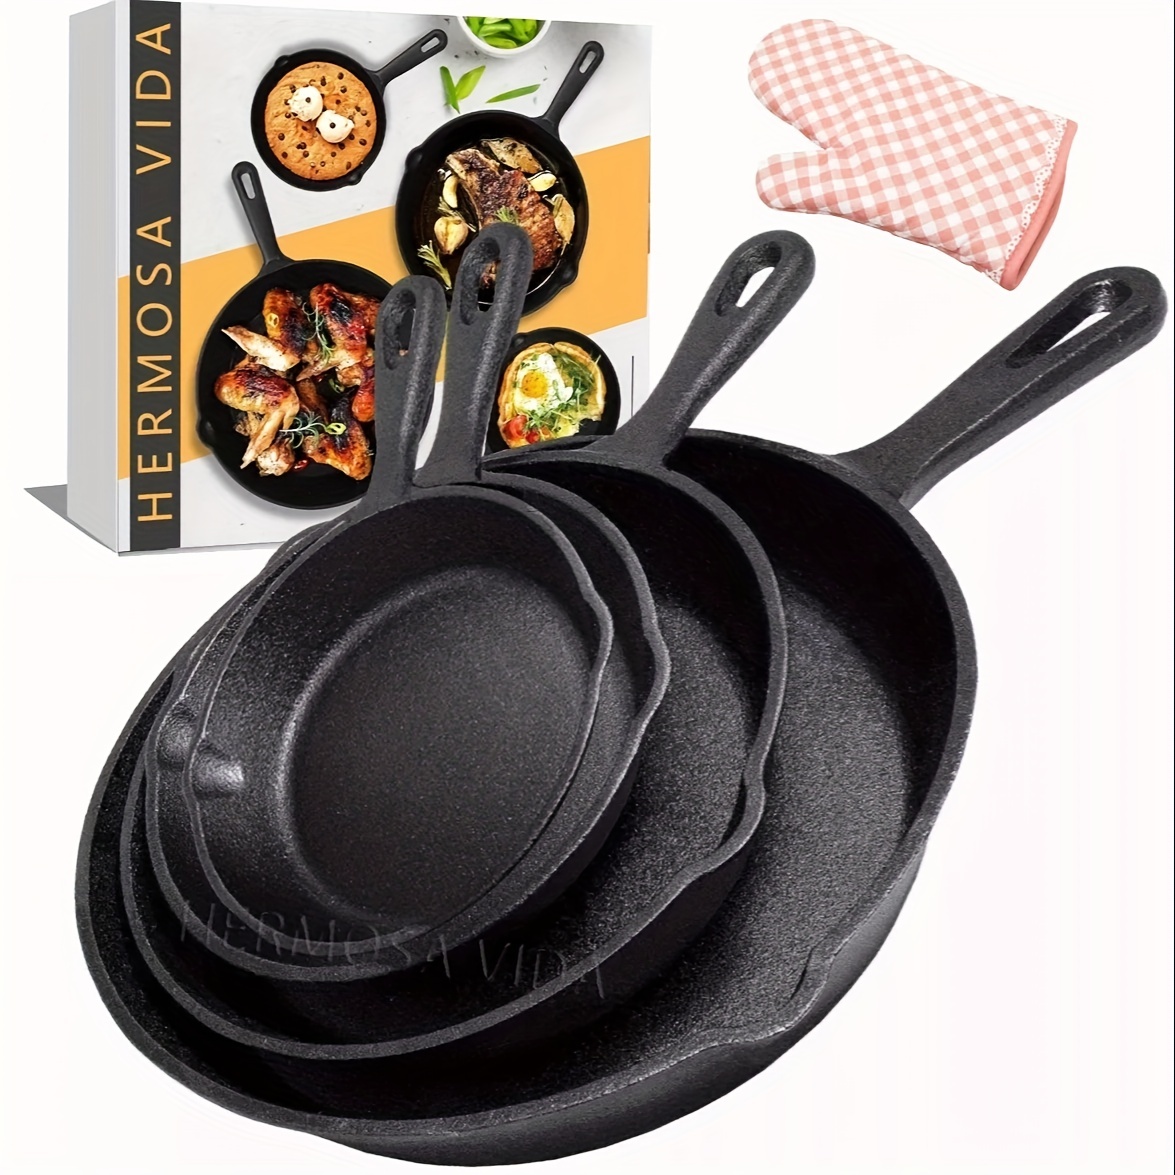  Simple Chef Cast Iron Skillet 3-Piece Set - Heavy-Duty  Professional Restaurant Chef Quality Pre-Seasoned Pan Cookware Set - 10,  8, 6 Pans - For Frying, Saute, Cooking, Pizza & More,Black: Home